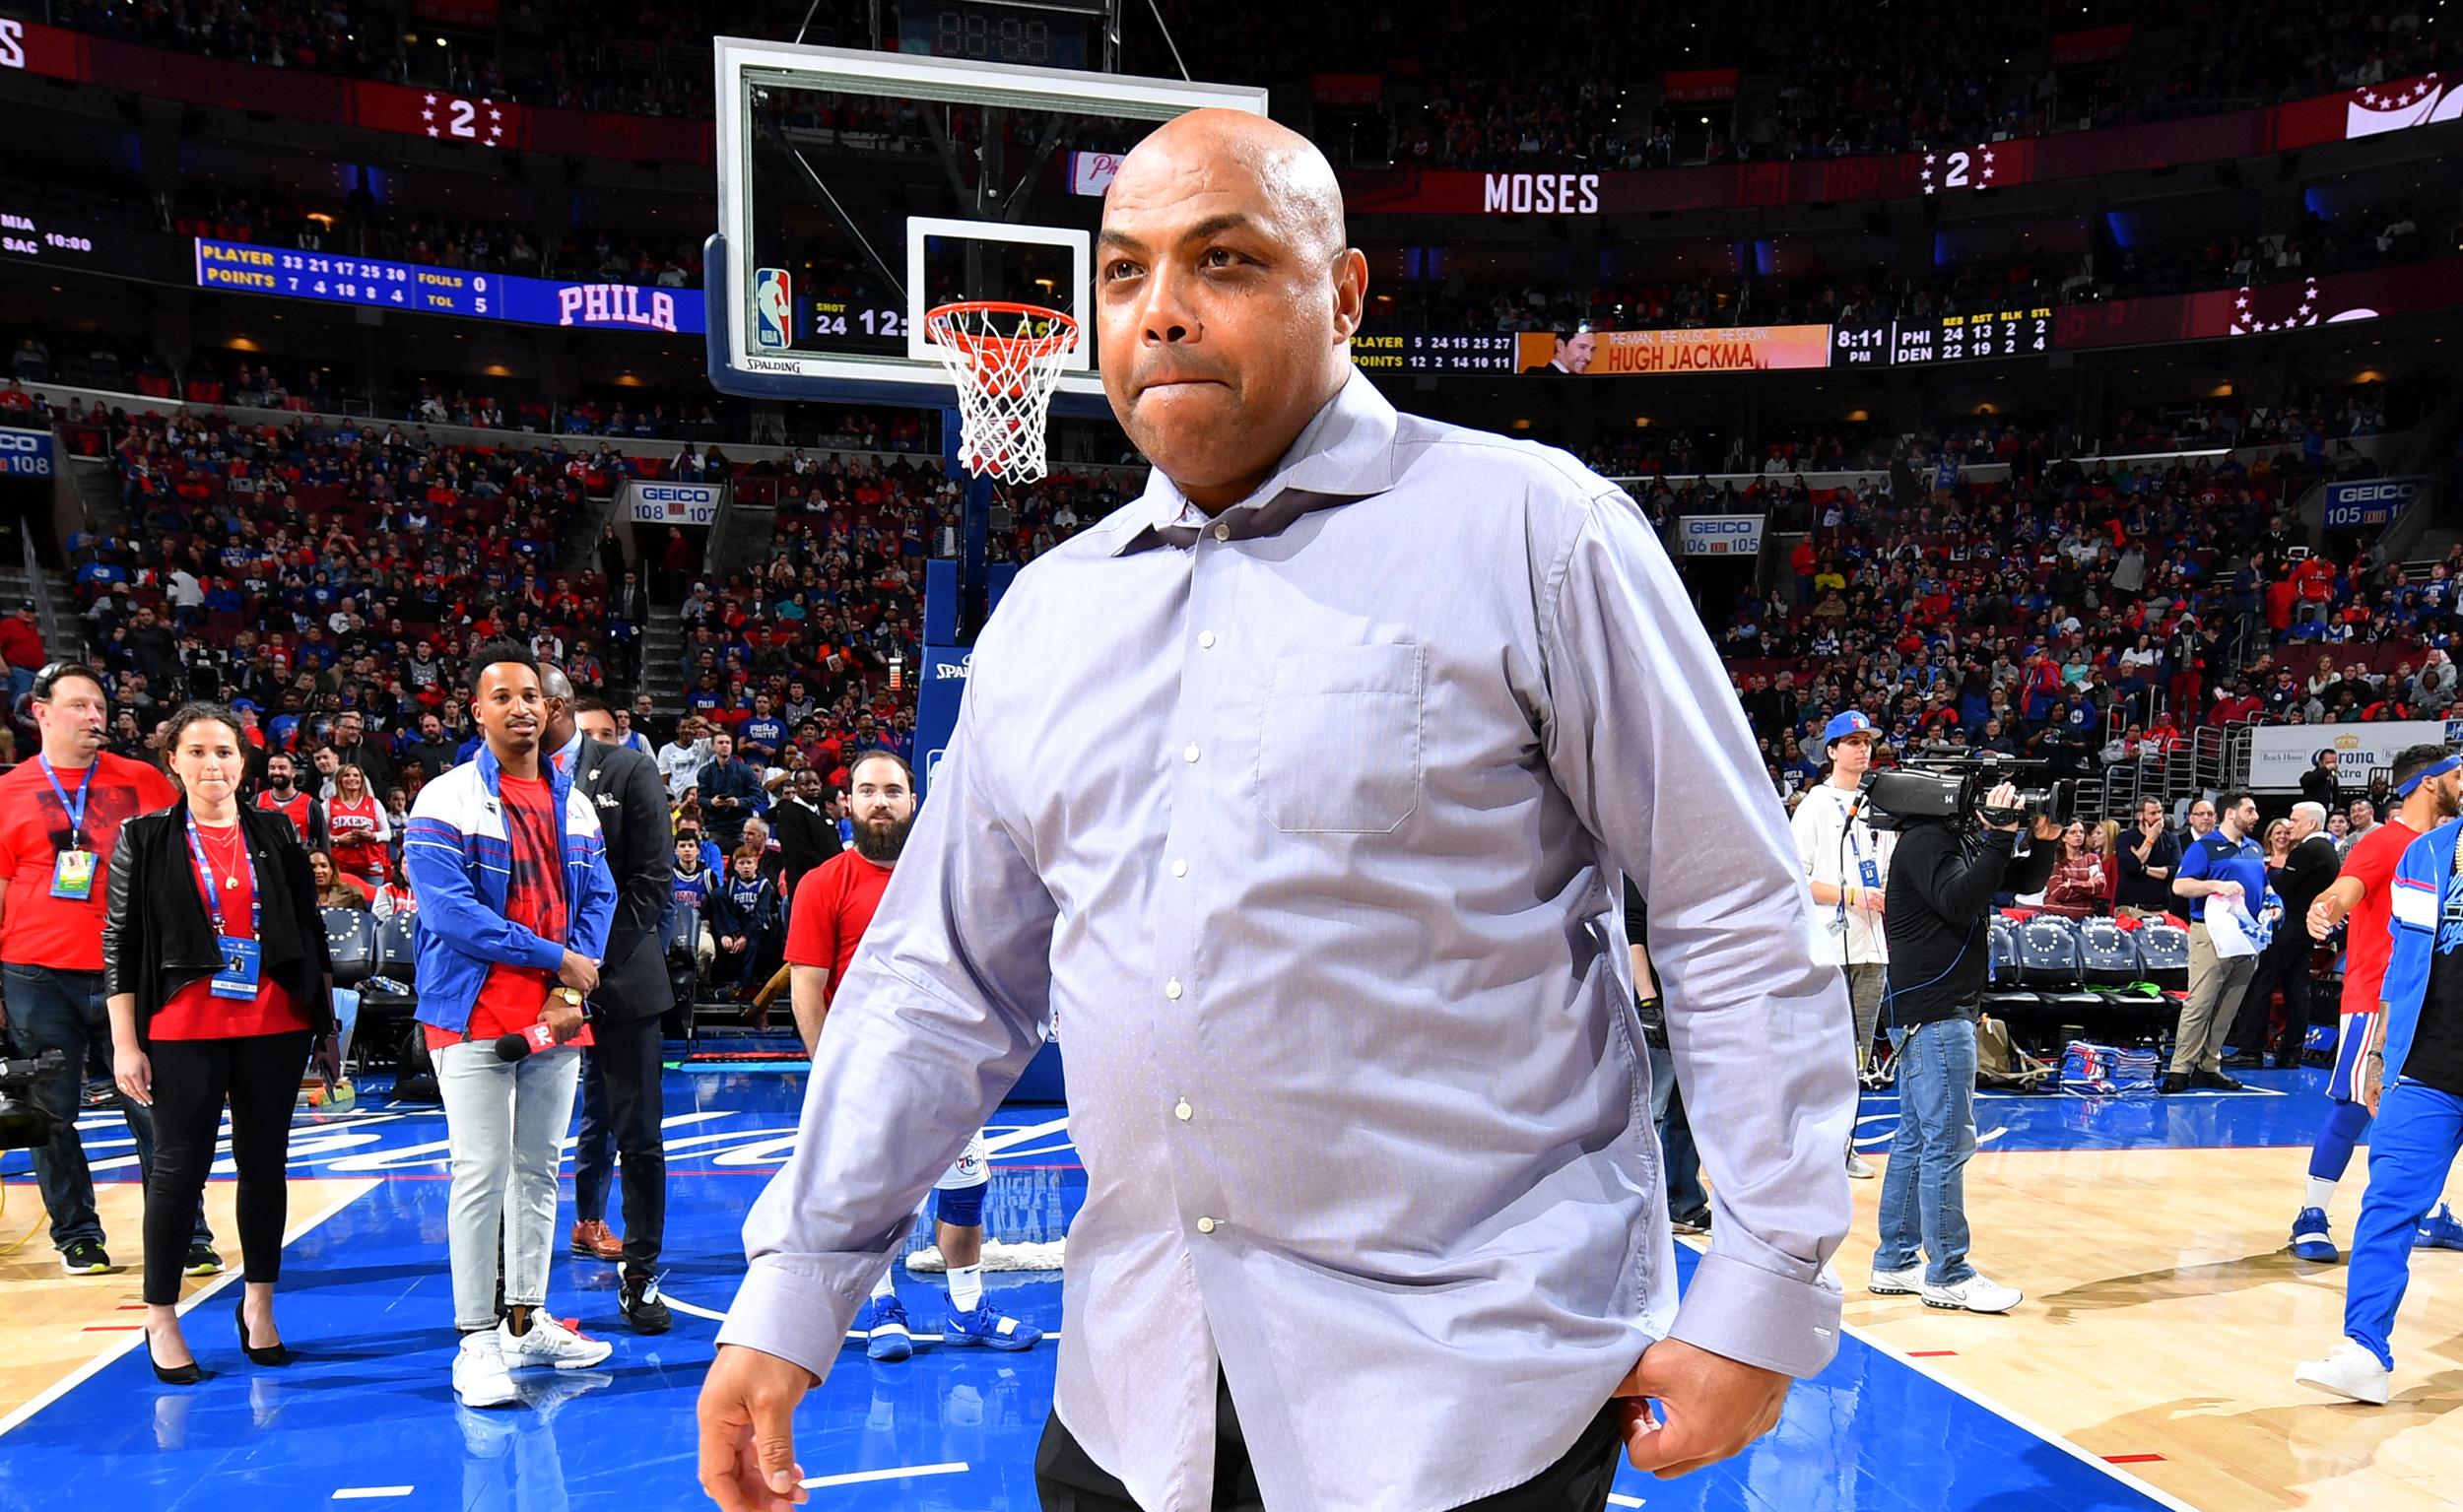 Charles Barkley attends Moses Malone's jersey retirement ceremony on Feb. 8, 2019 at the Wells Fargo Center in Philadelphia, Pa. (Photo by Jesse D. Garrabrant/NBAE via Getty Images)